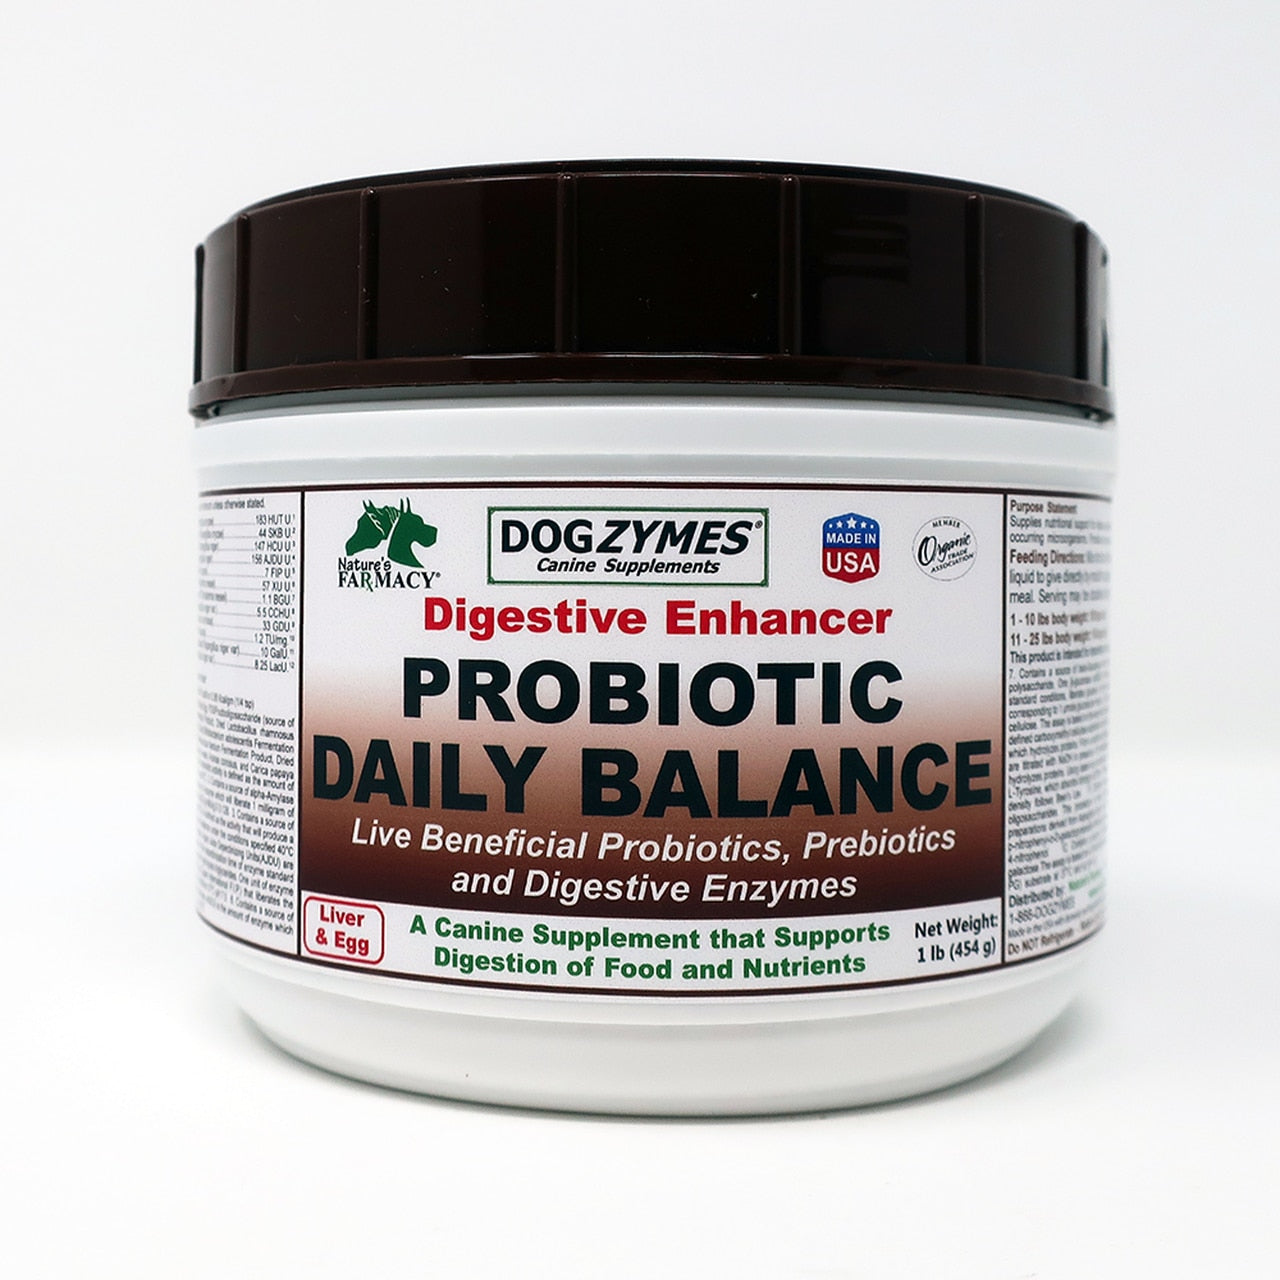 Nature's Farmacy Dogzymes Probiotic Daily Balance Digestive Enhancer Supplement For Dogs